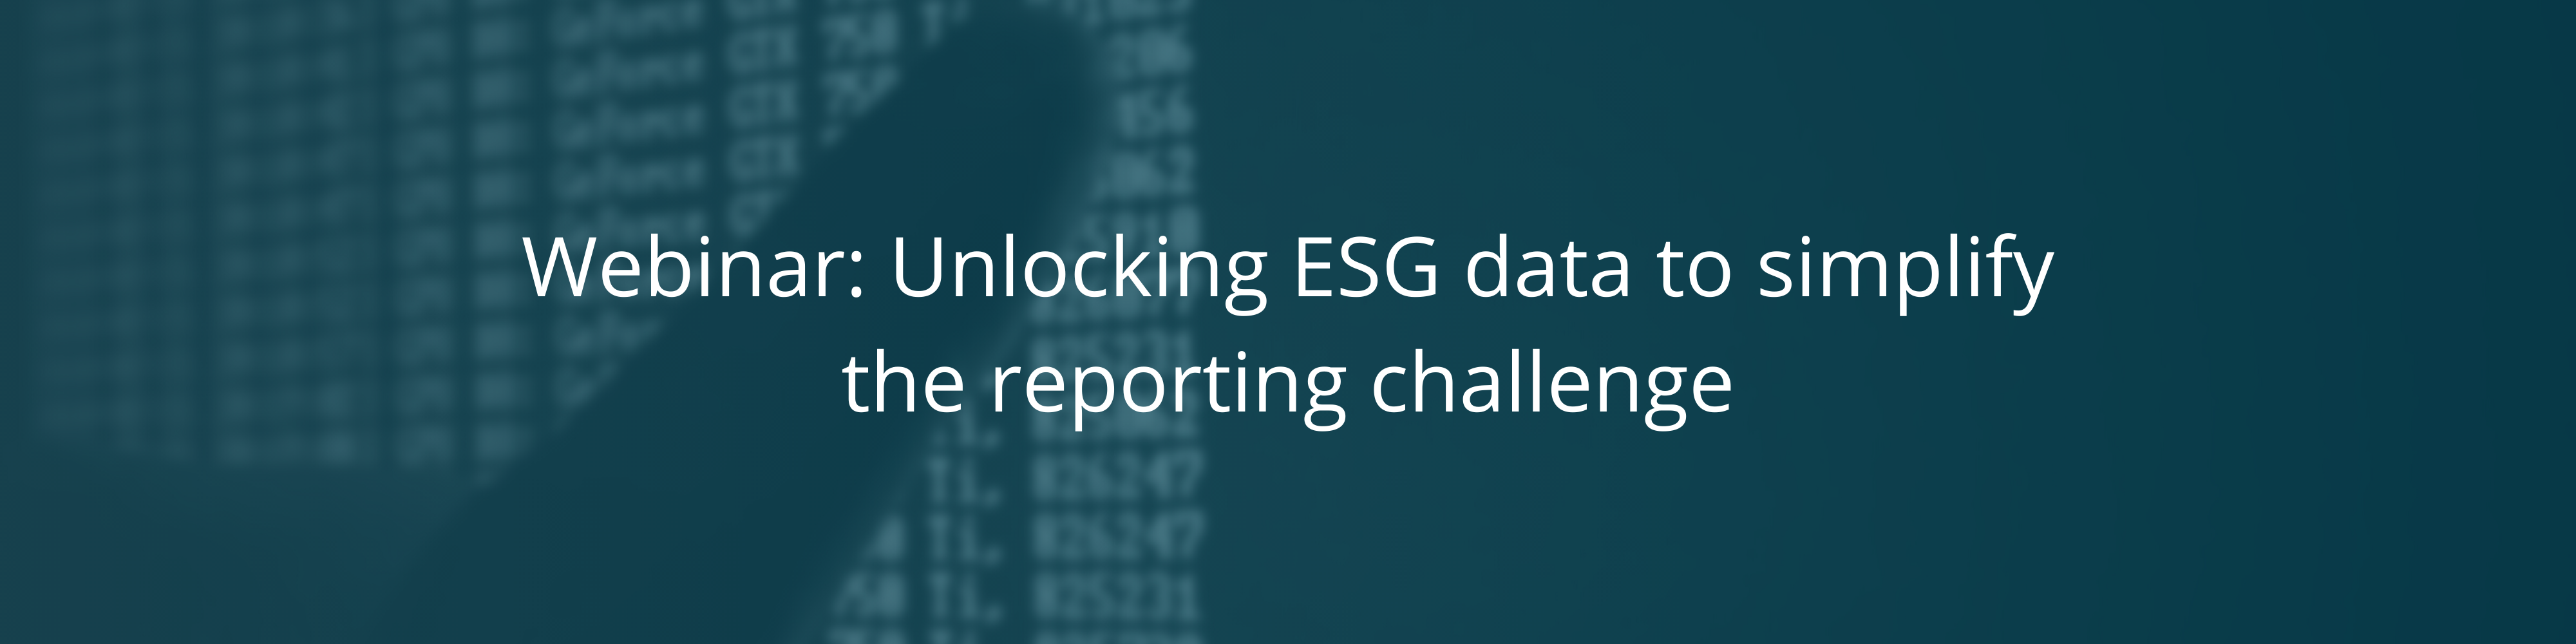 Unlocking ESG data to simplify the reporting challenge